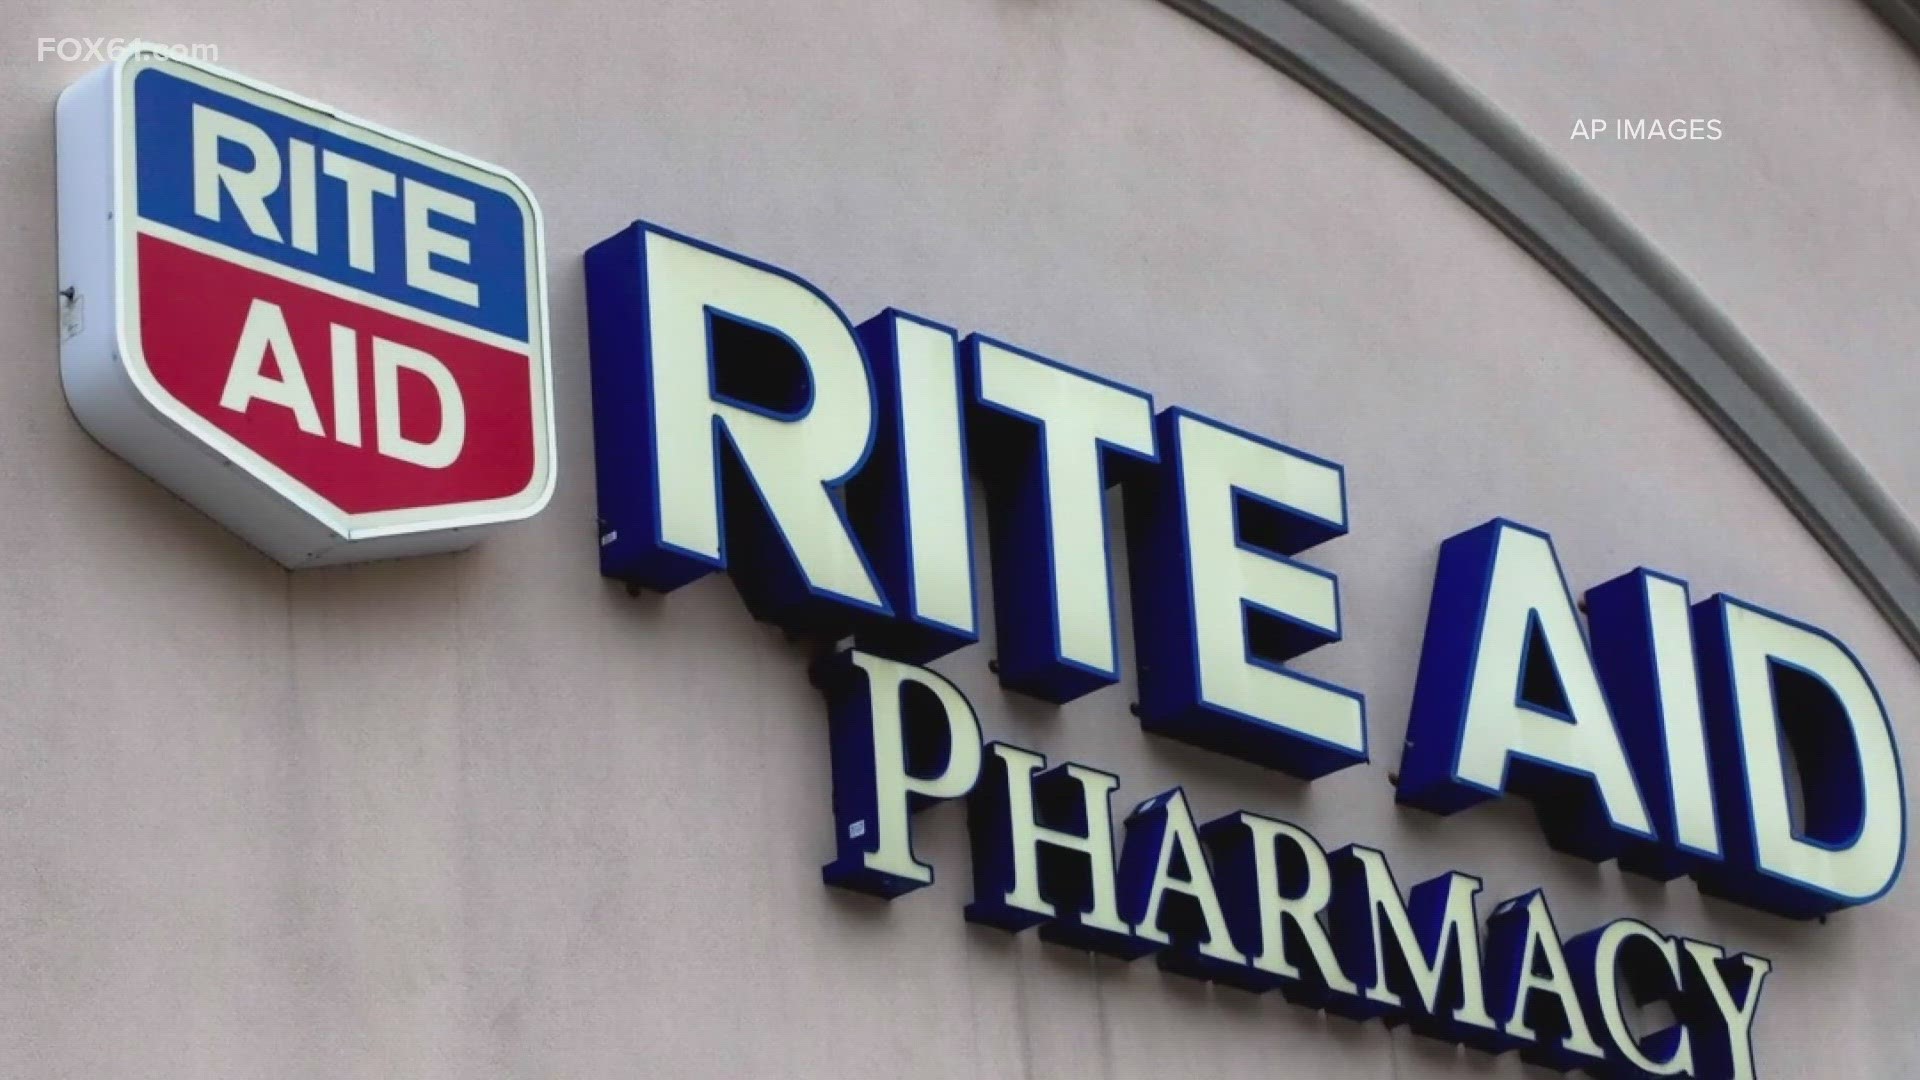 Rite Aid said it would also close “underperforming” stores.